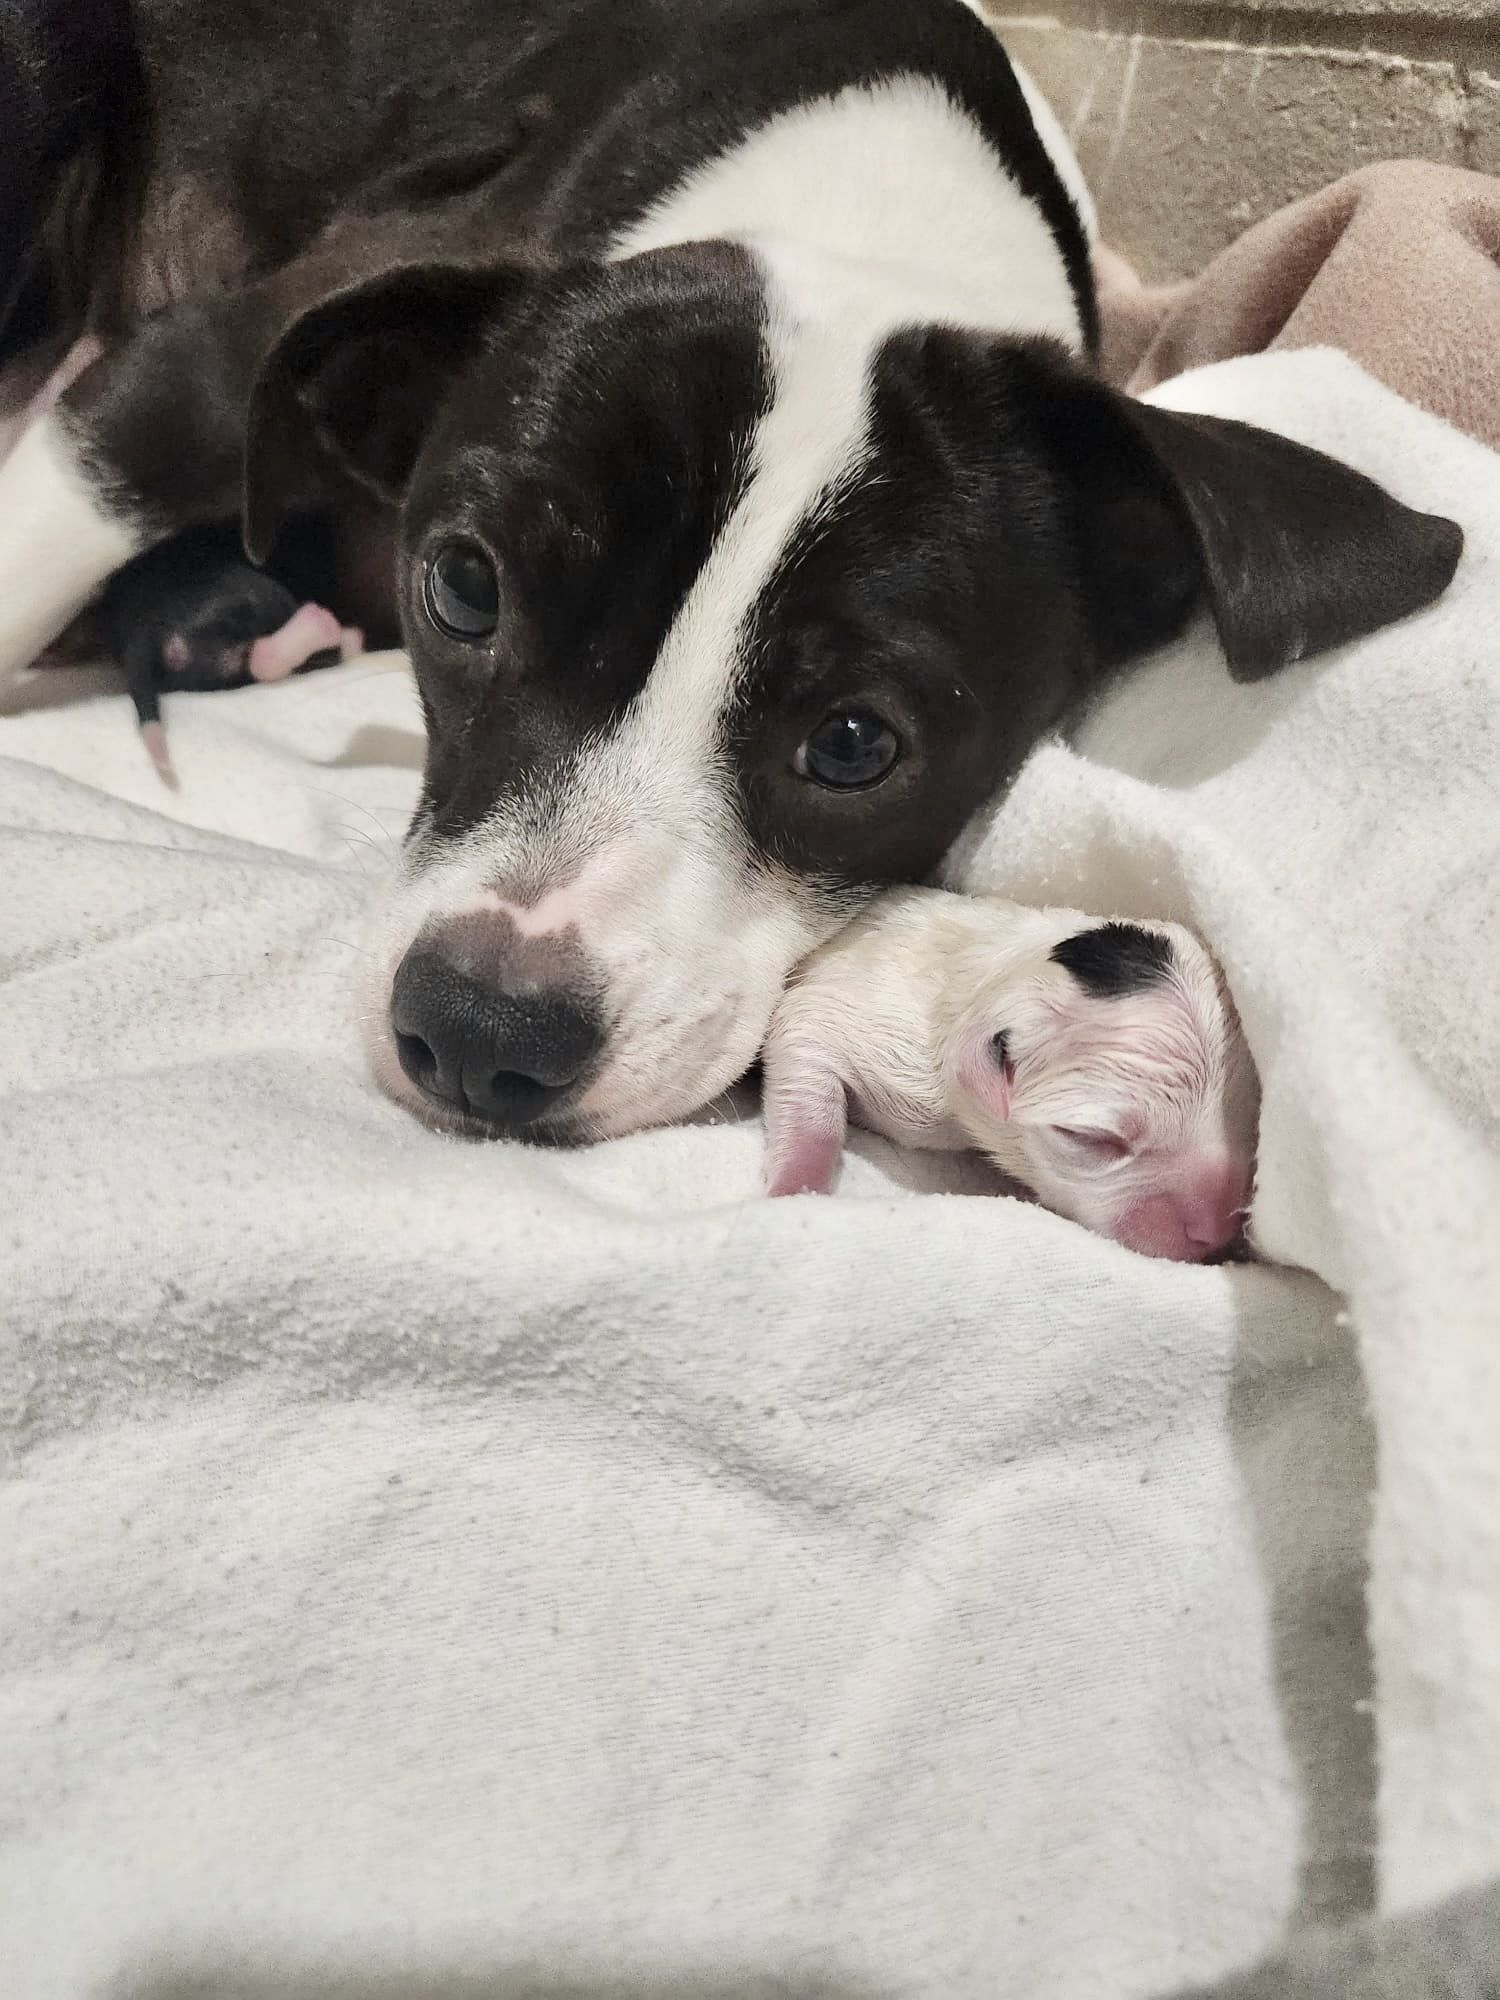 Rescued Pups Need Your Support